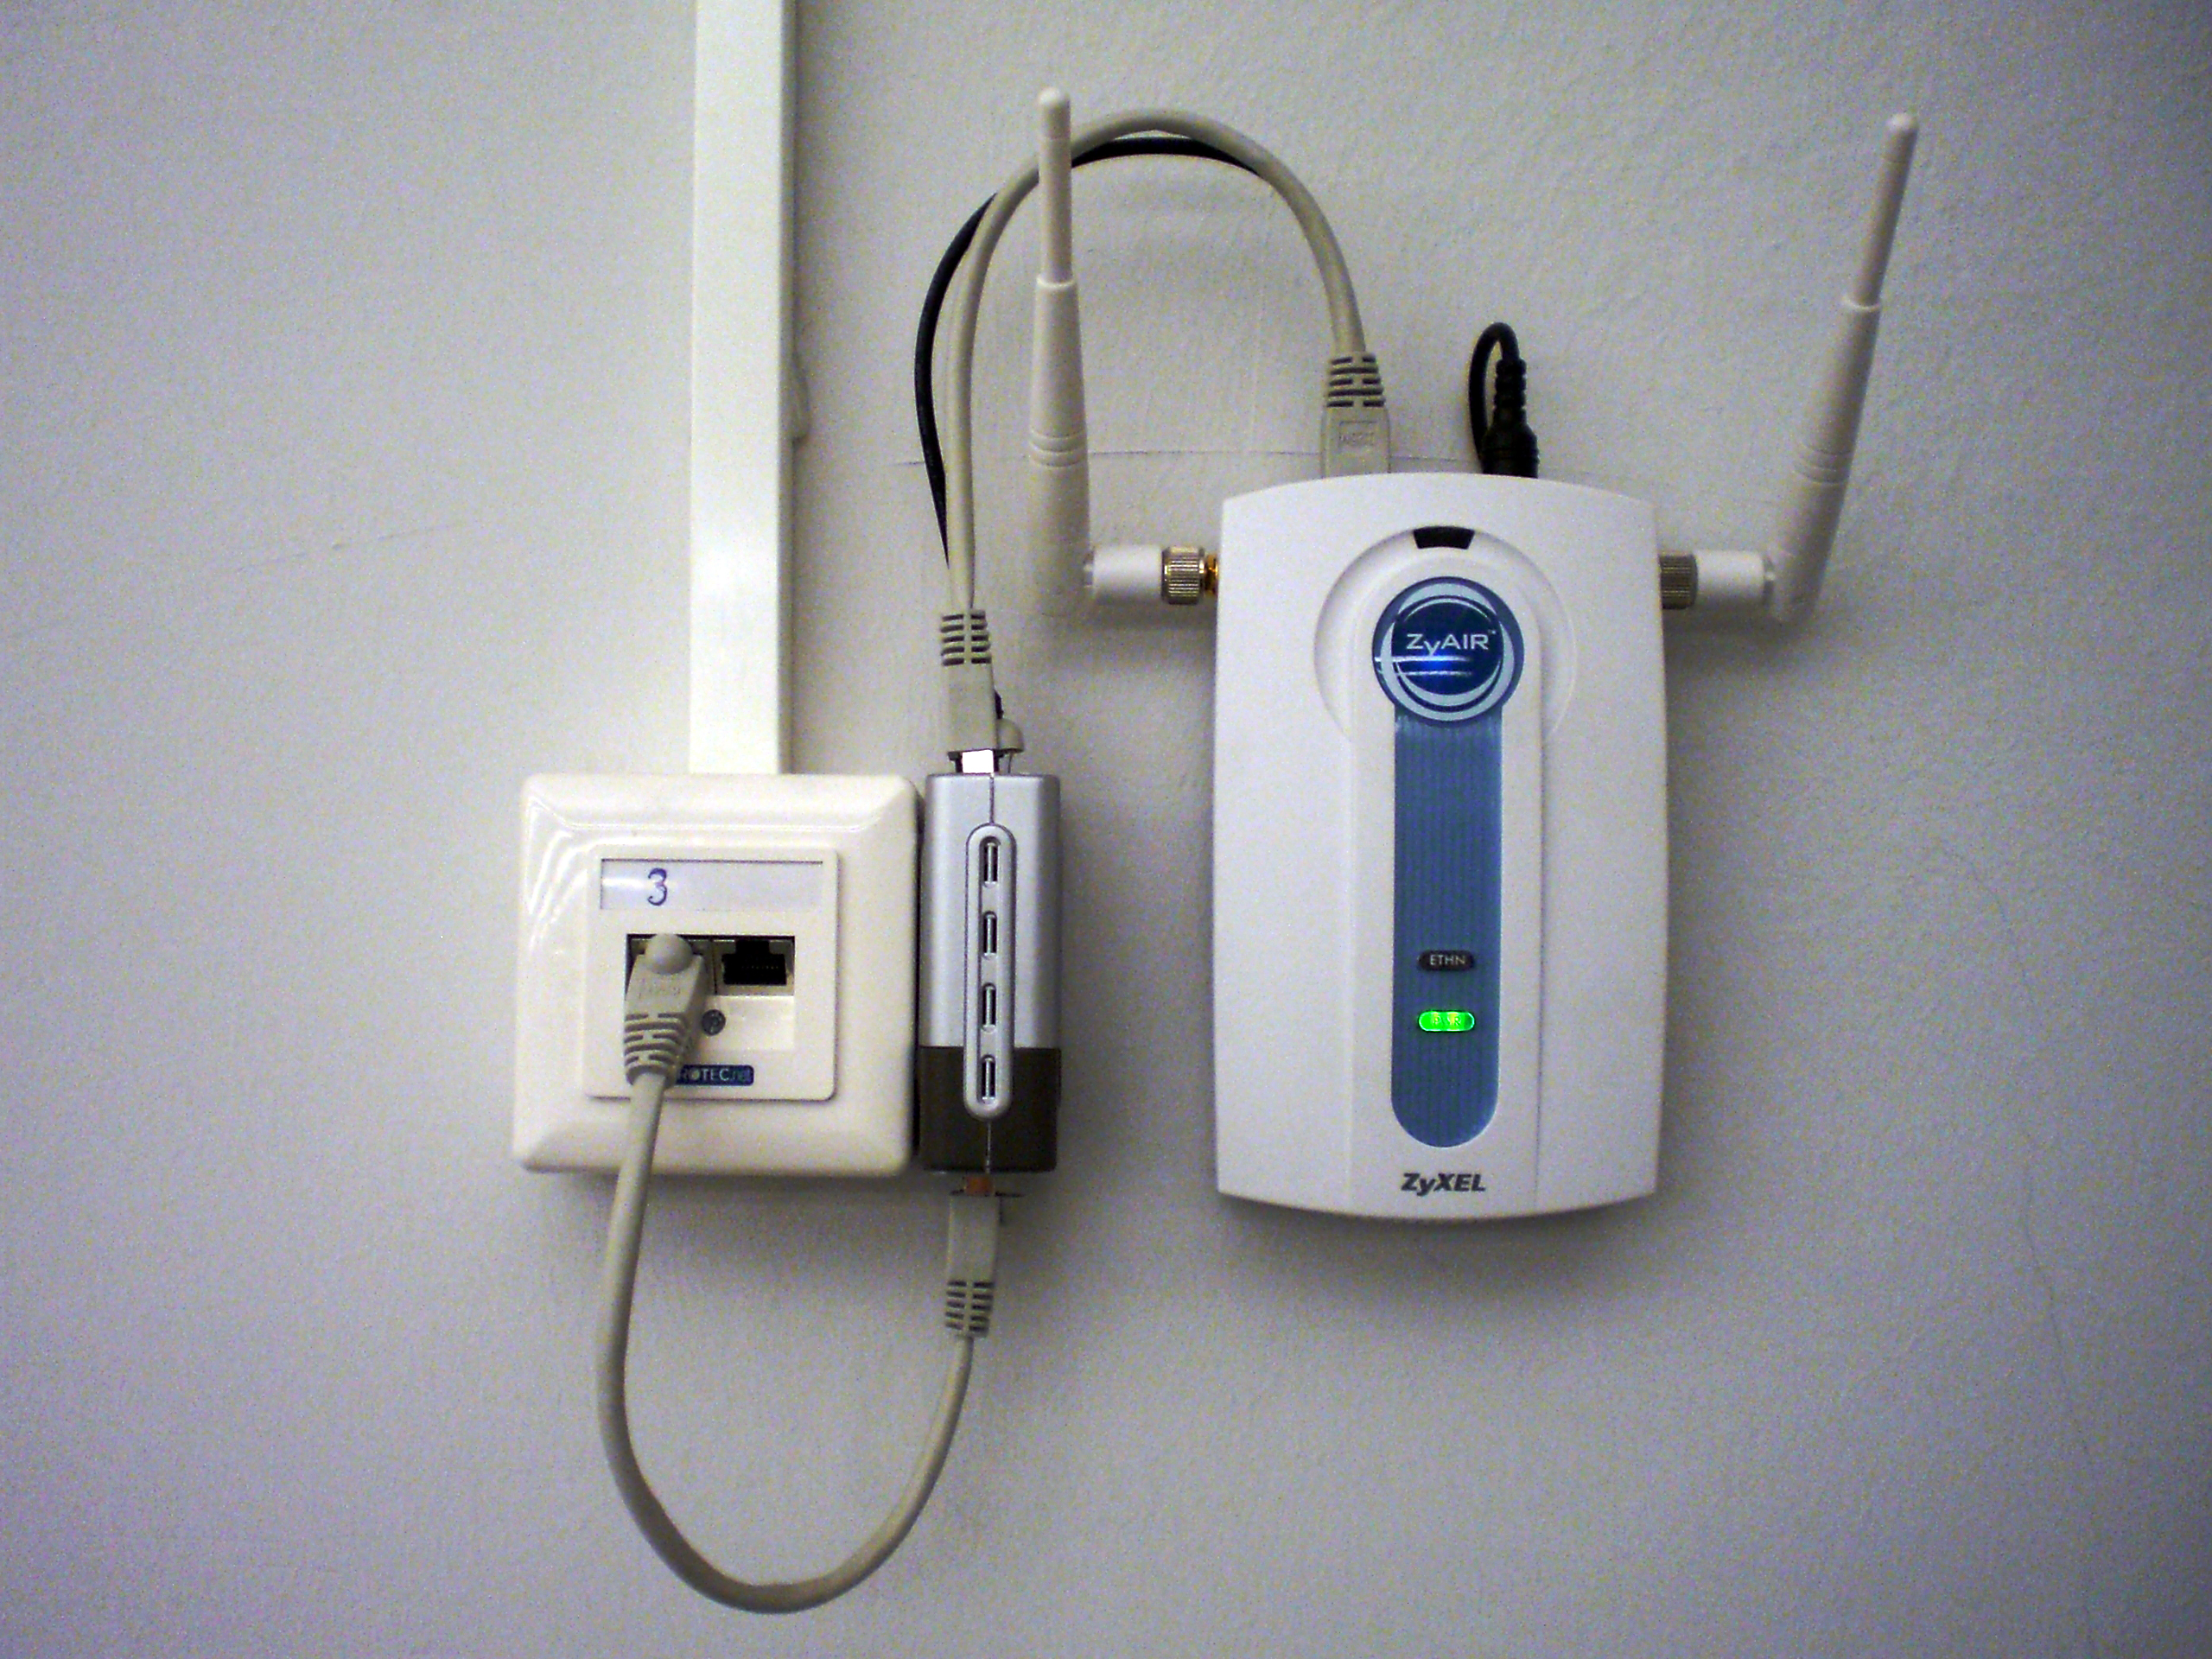 Power supply and Ethernet cable connections